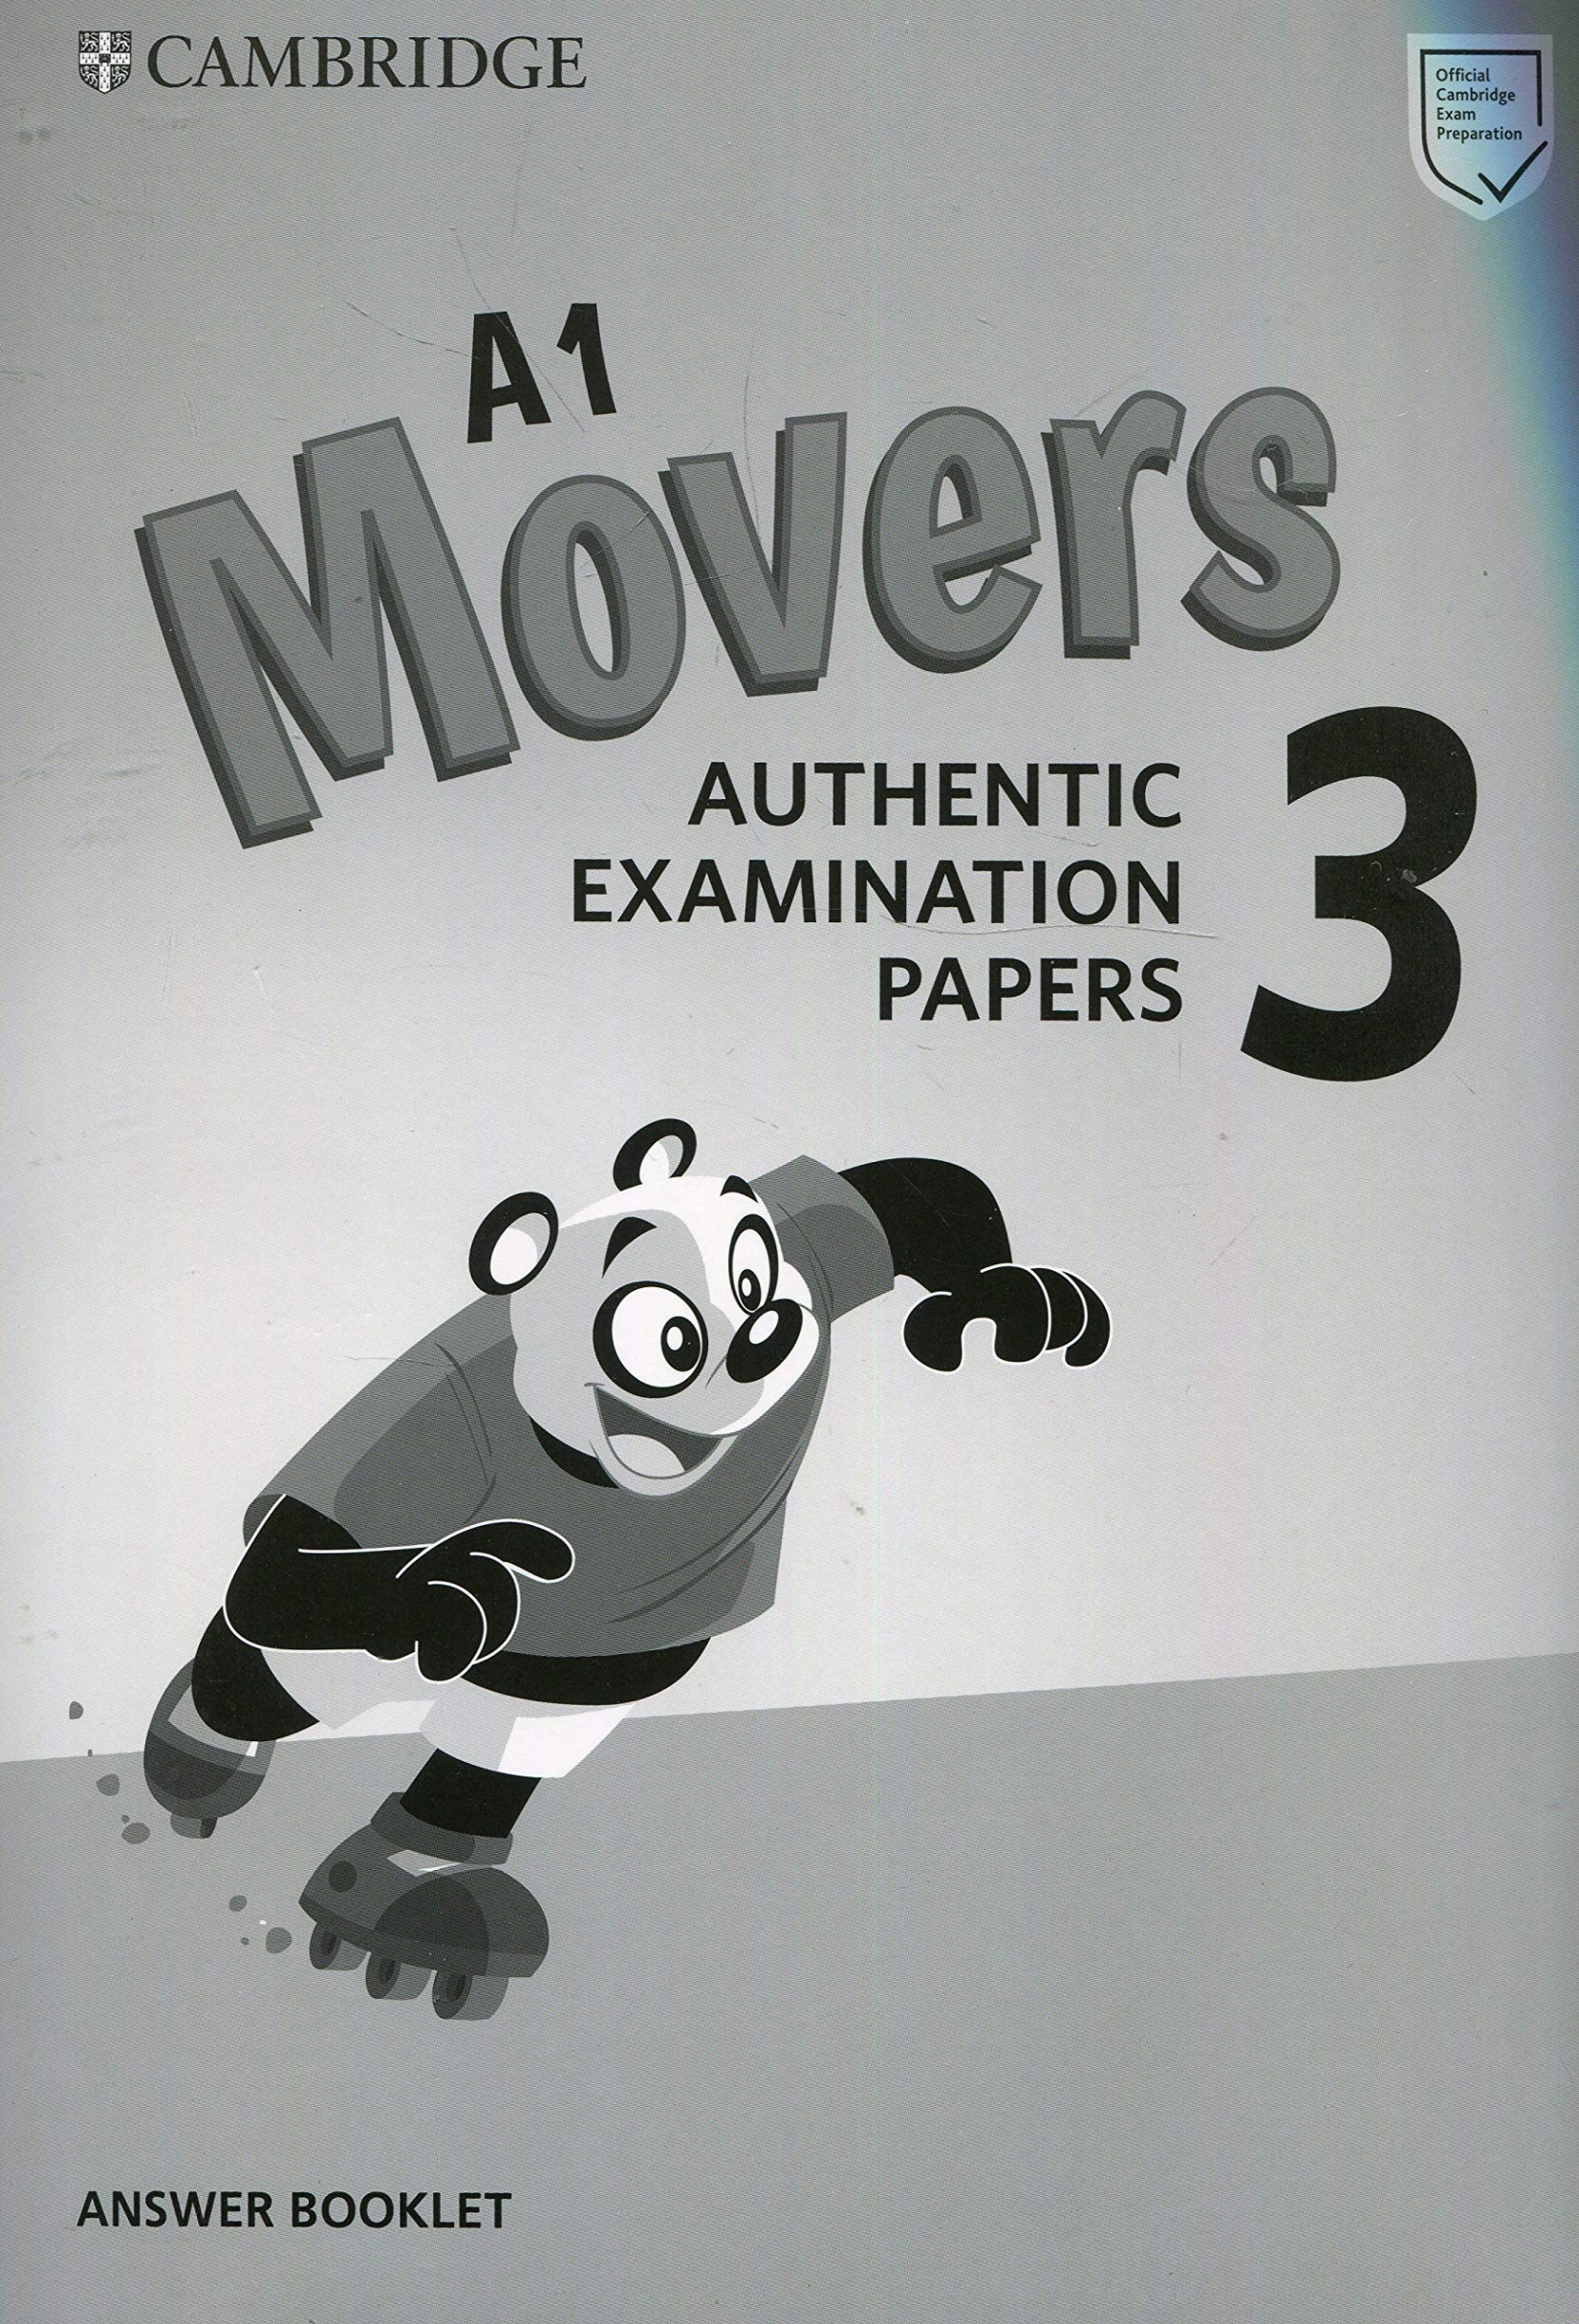 A1 Movers 3. Authentic Examination Papers. Answer Booklet 